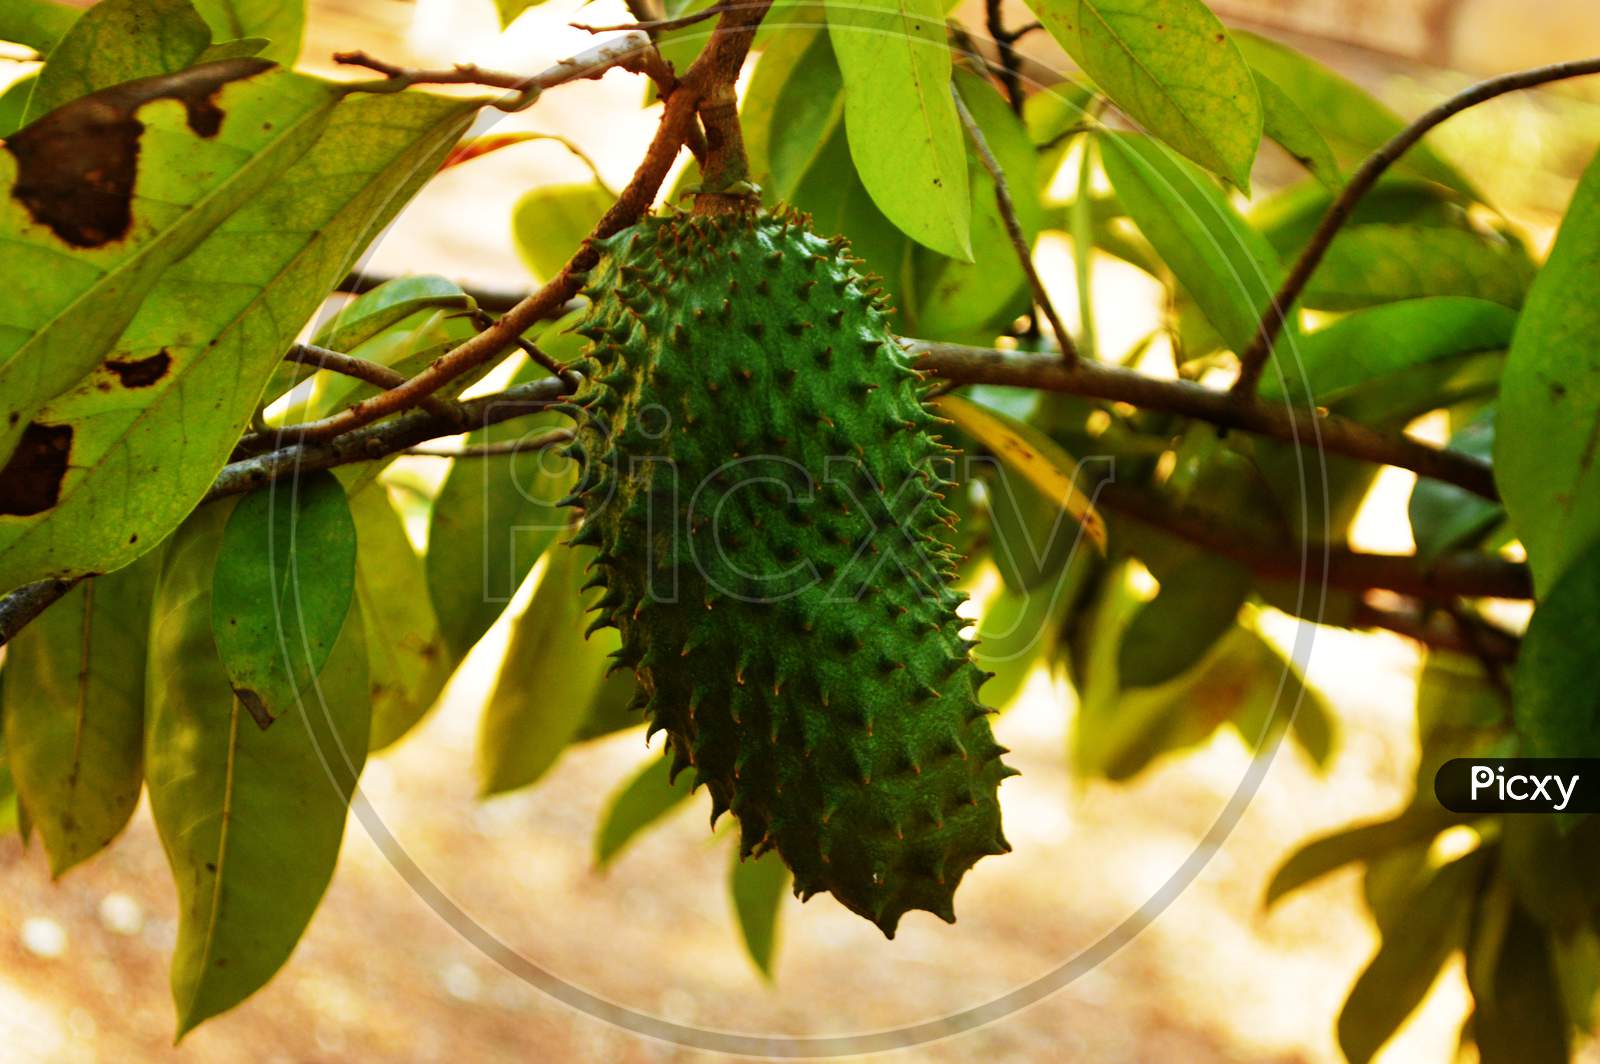 View Of Raw Soursop In A Blurred Background